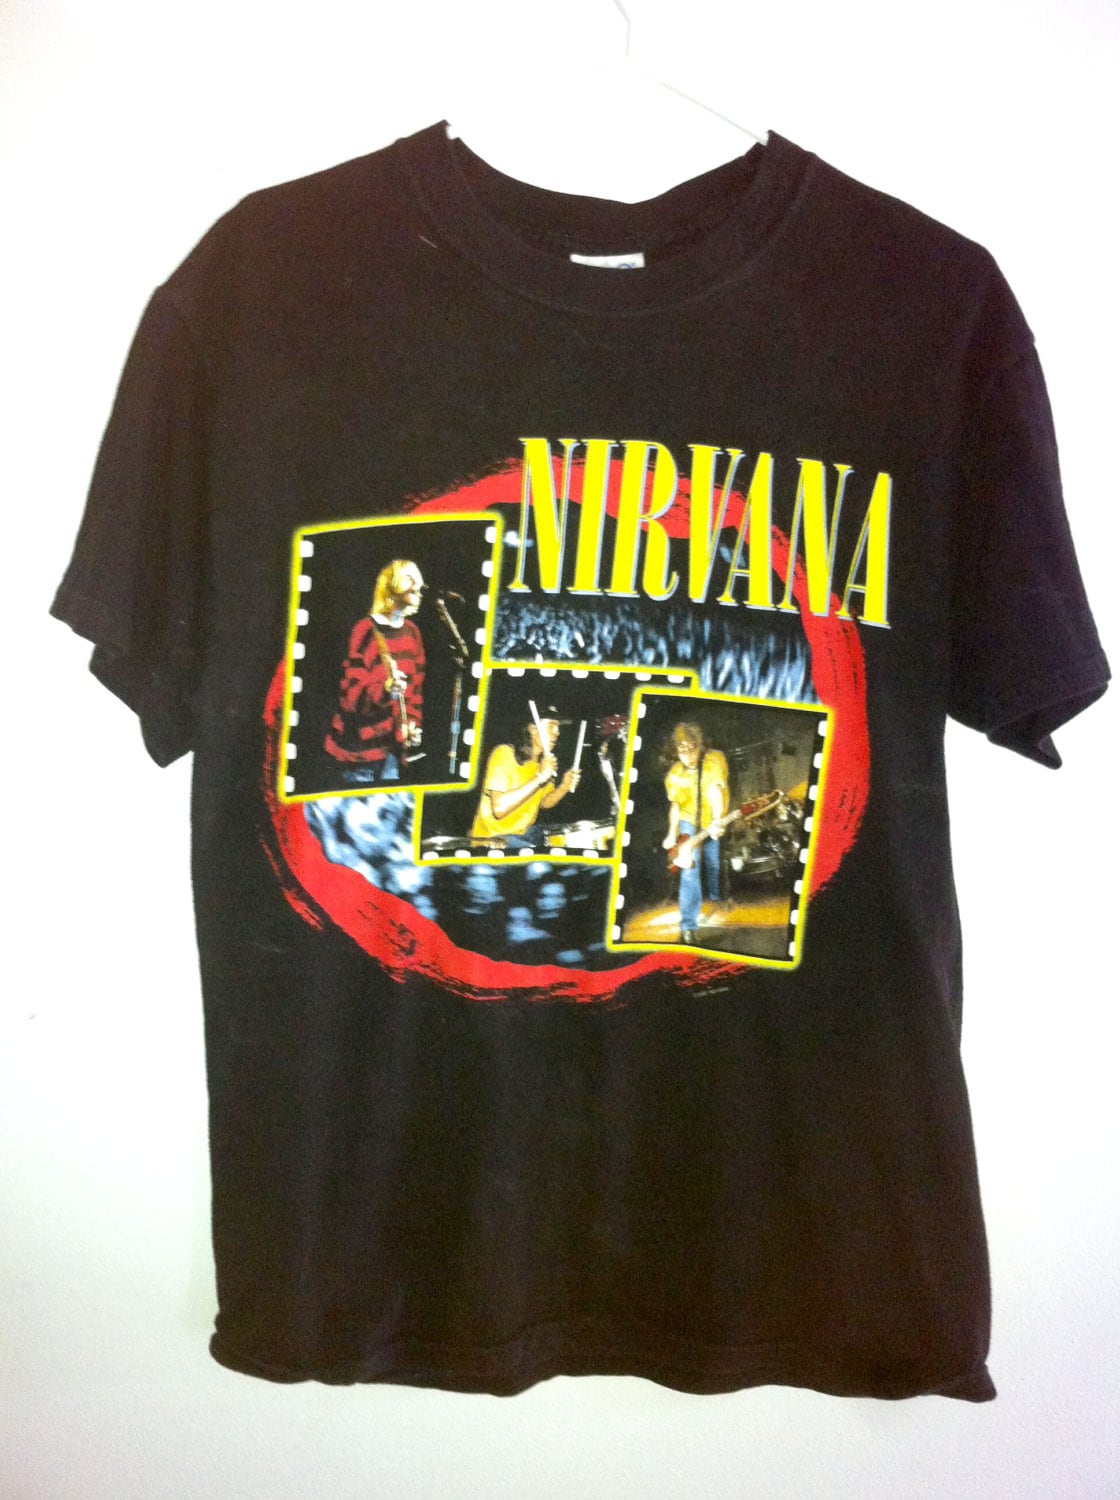 90s NIRVANA band T SHIRT M by YARD666SALE on Etsy